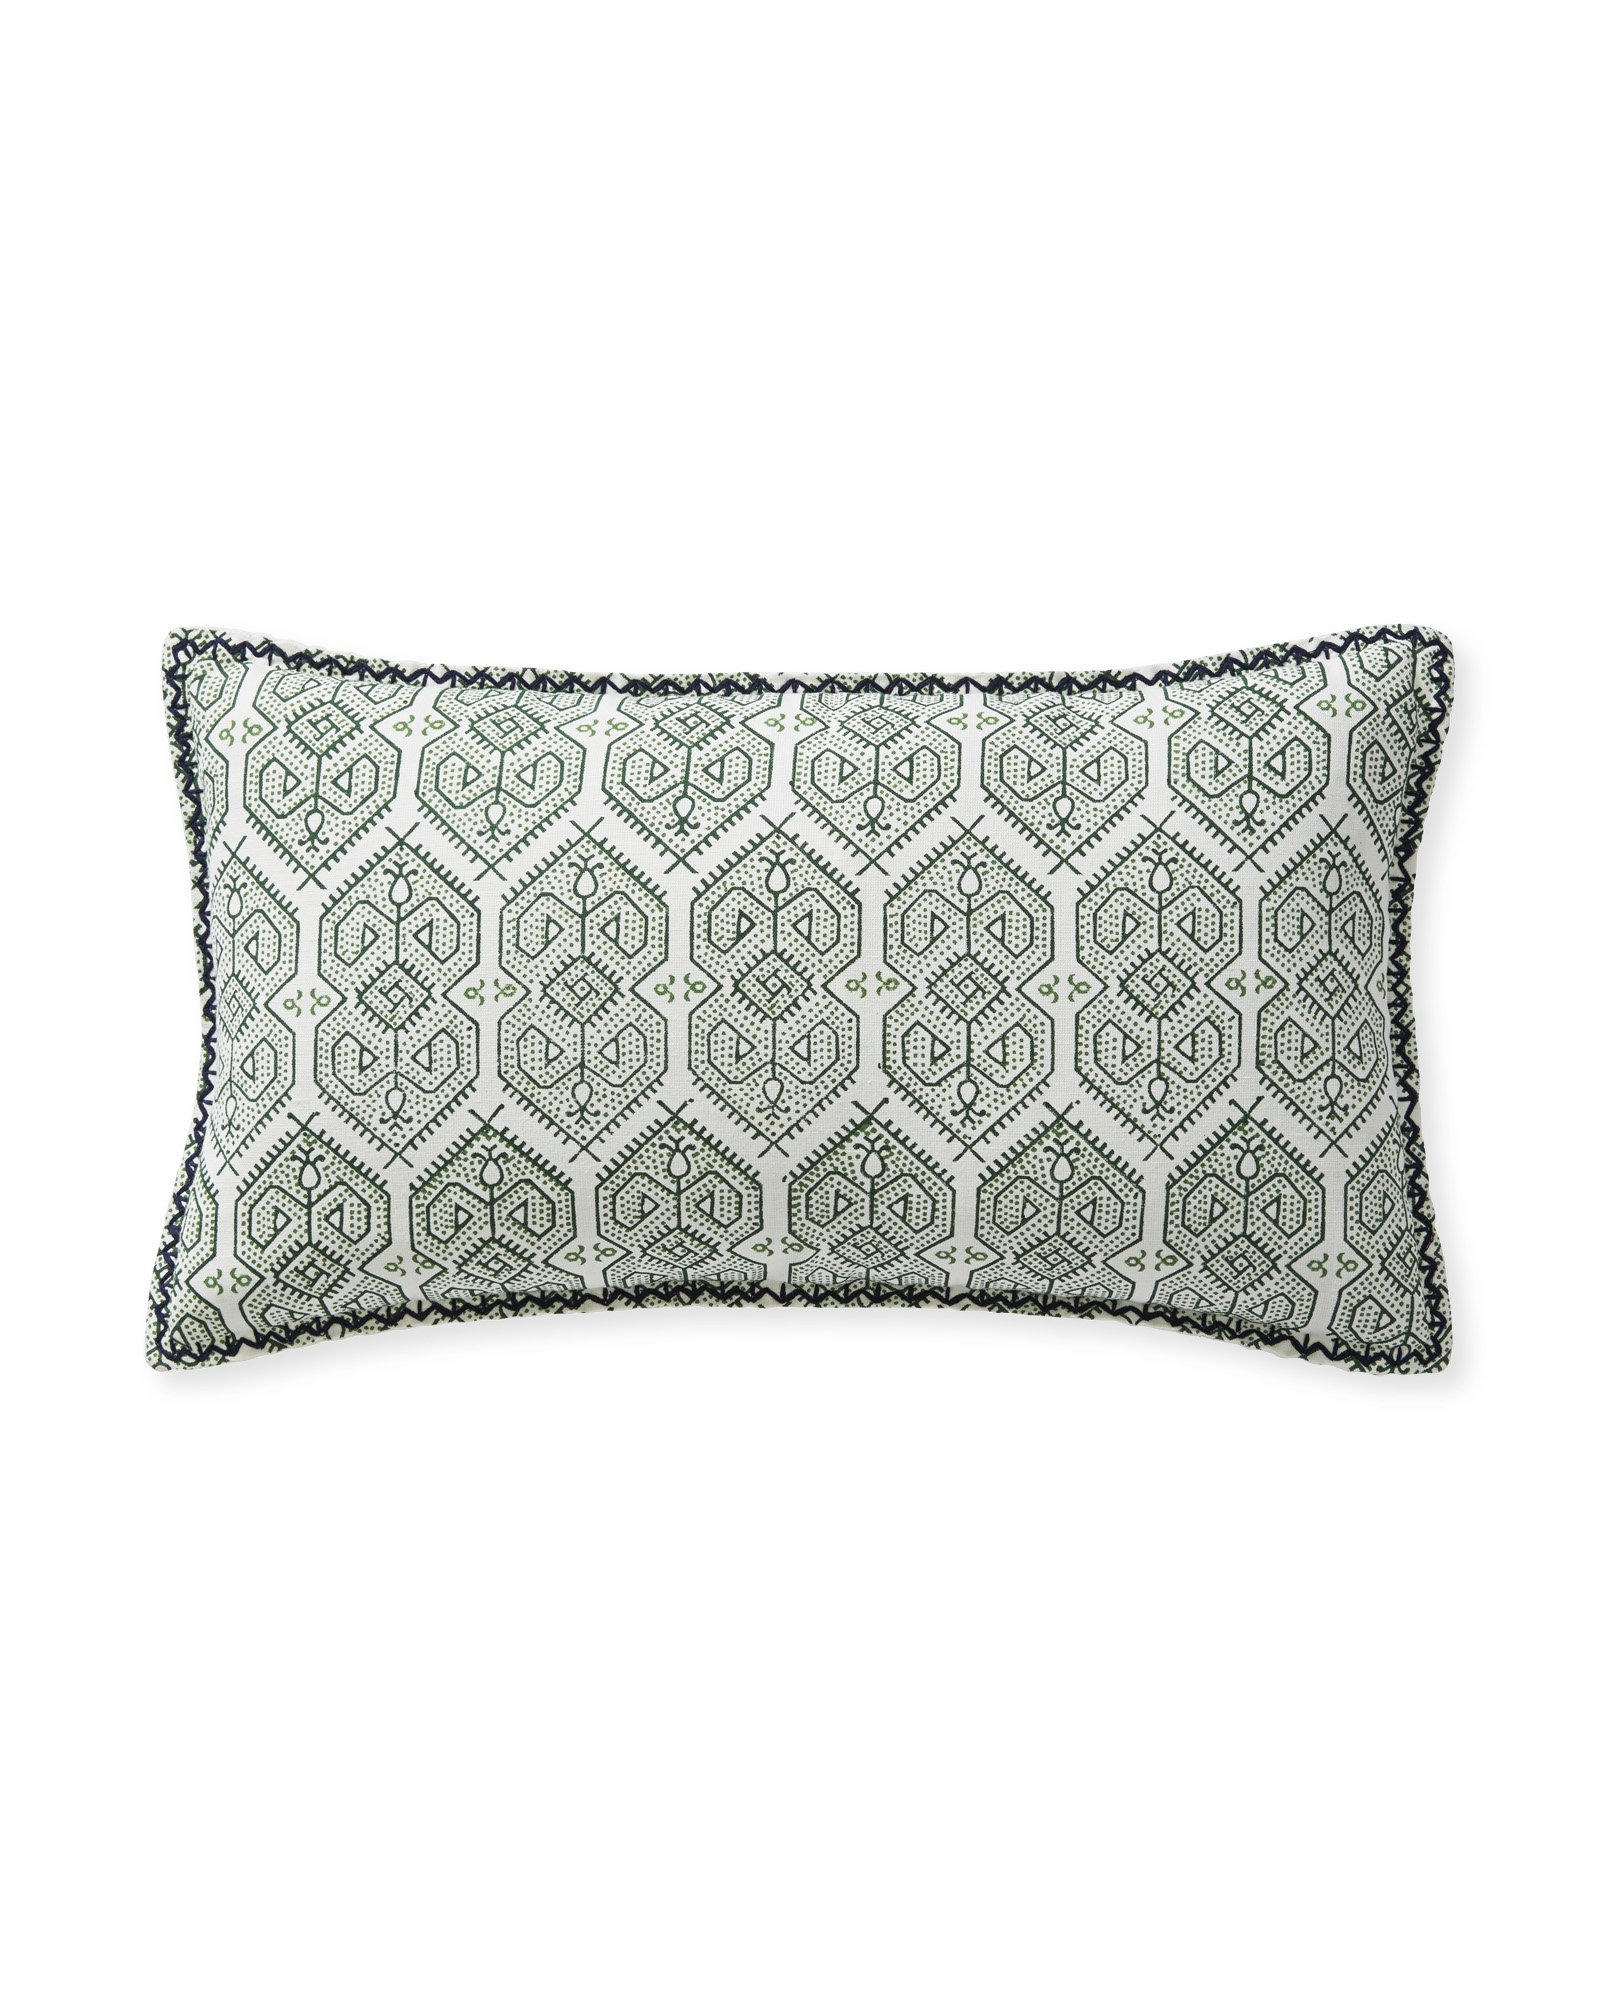 Jamesport 12" x 21" Pillow Cover - Palm Green - Insert sold separately - Image 0